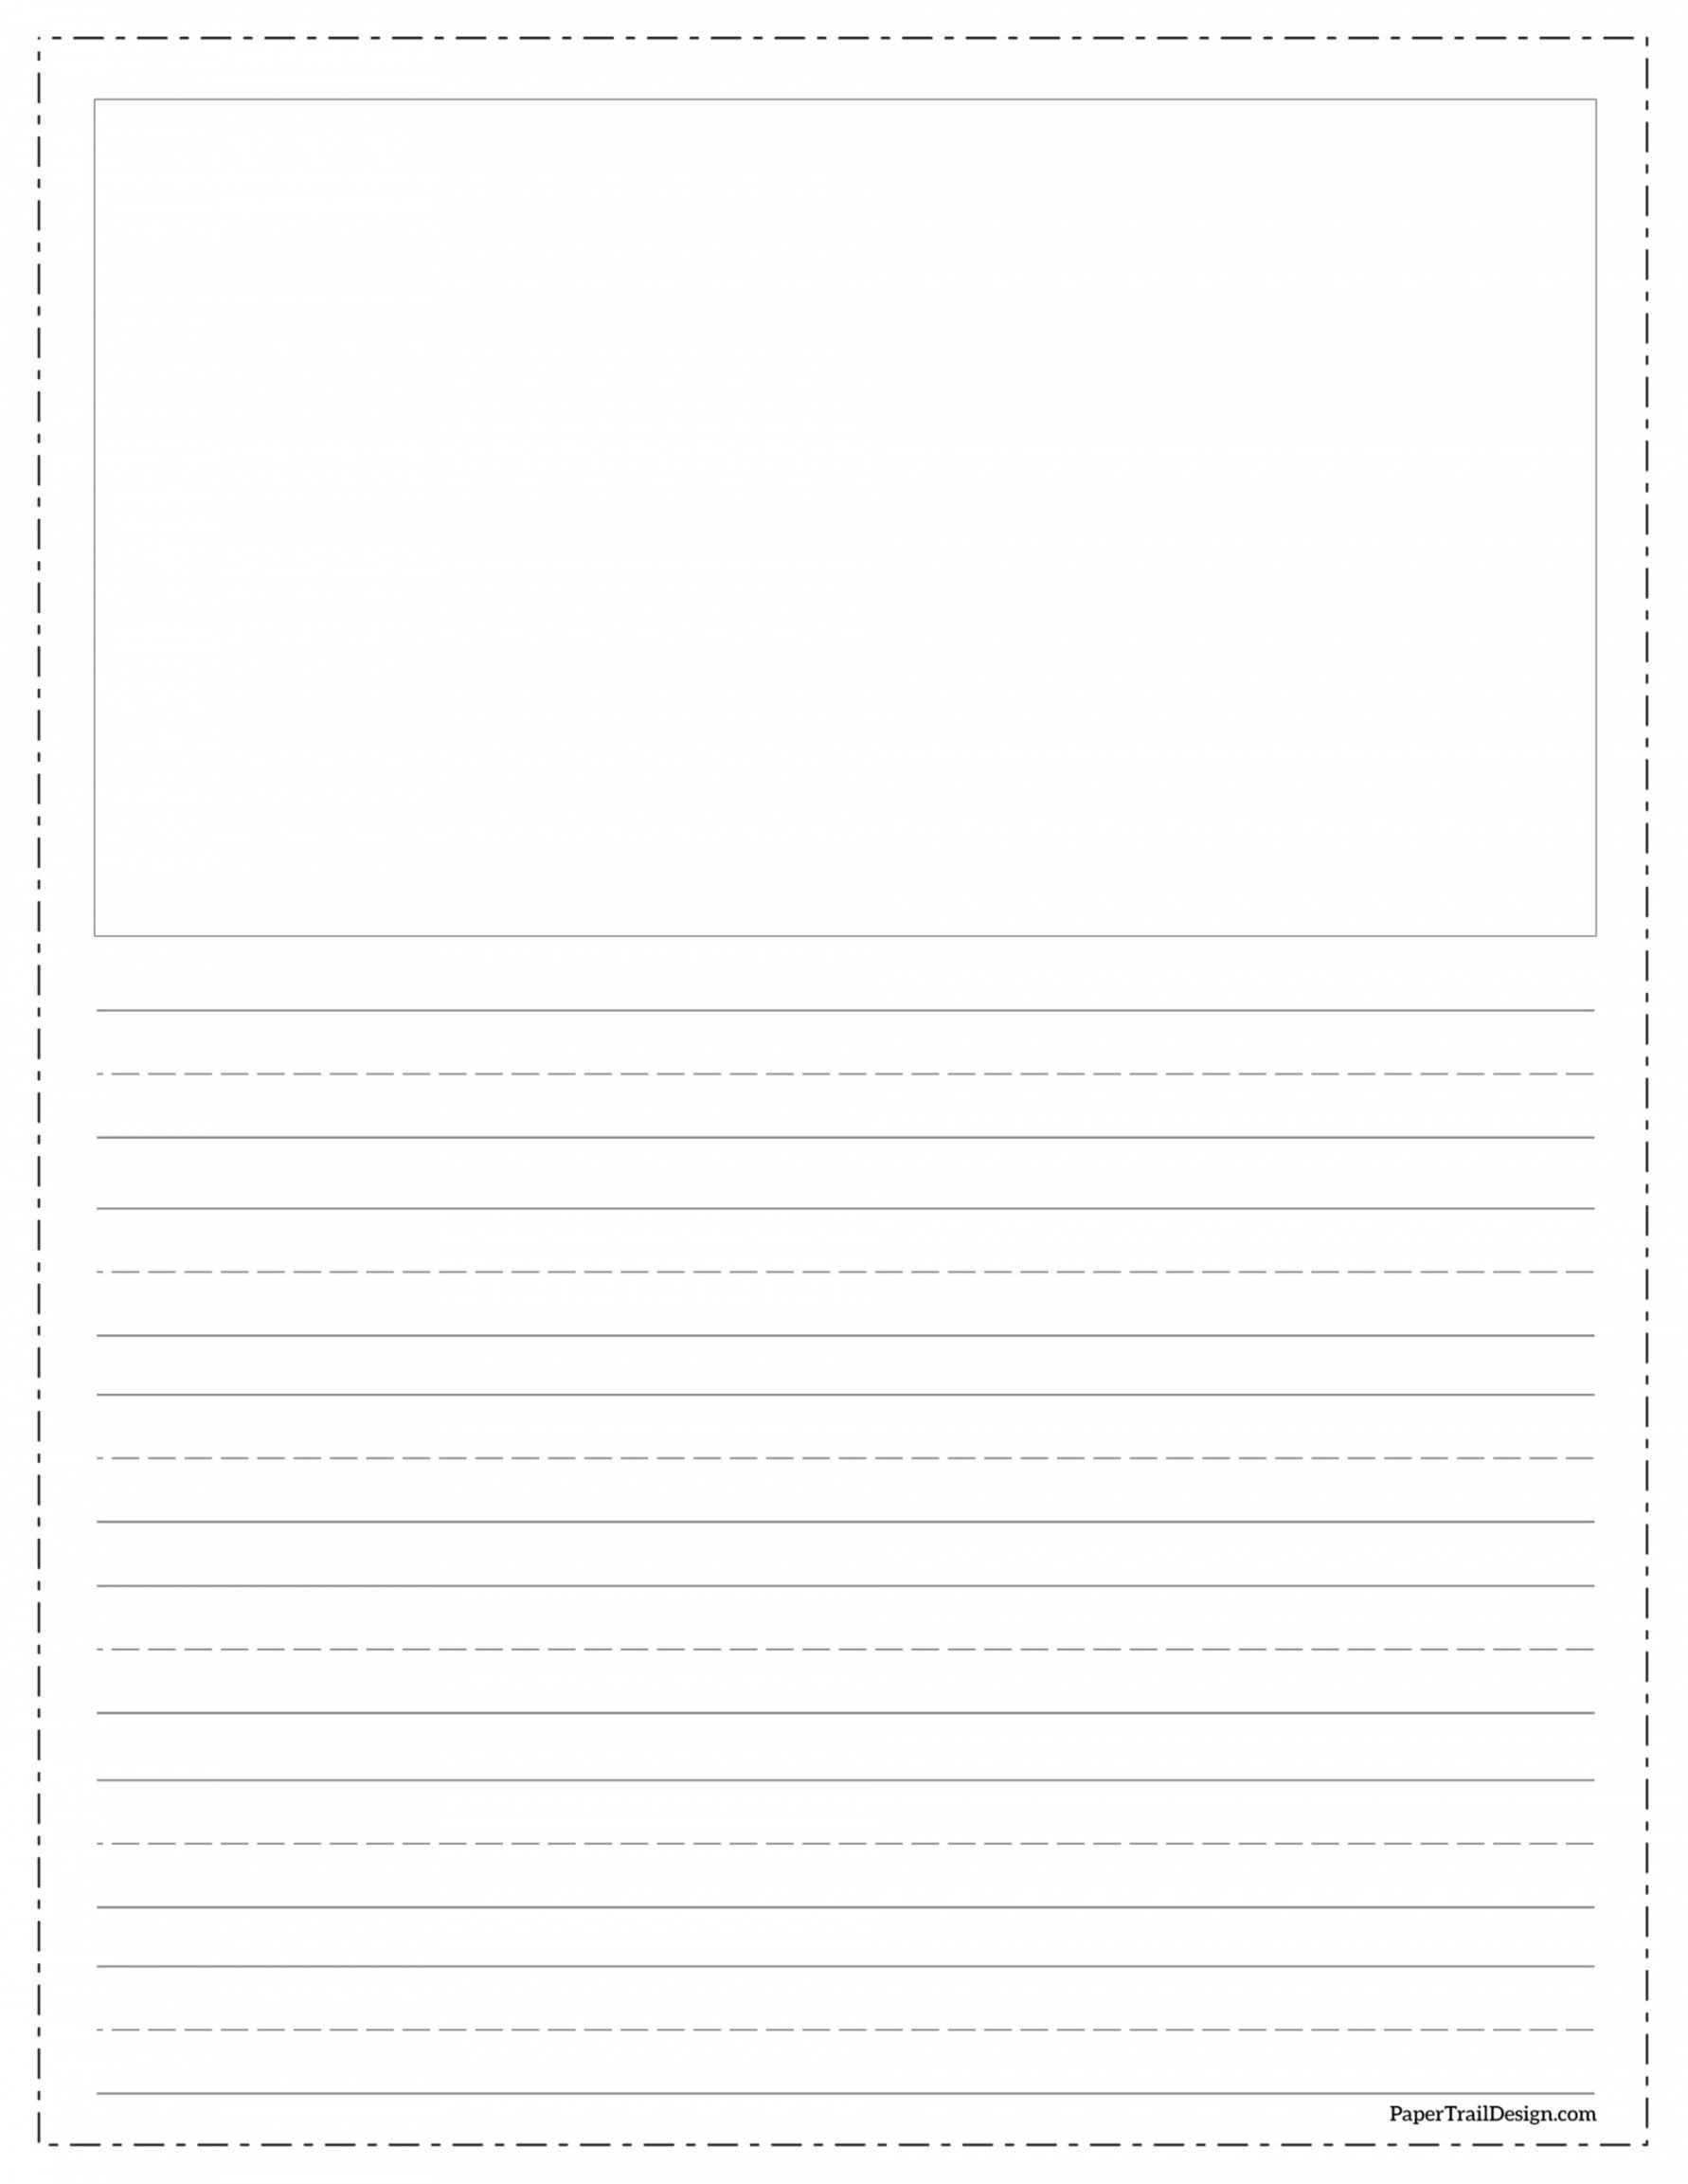 Free Printable Lined Writing Paper with Drawing Box - Paper Trail  - FREE Printables - Printable Free Writing Paper With Picture Box Pdf